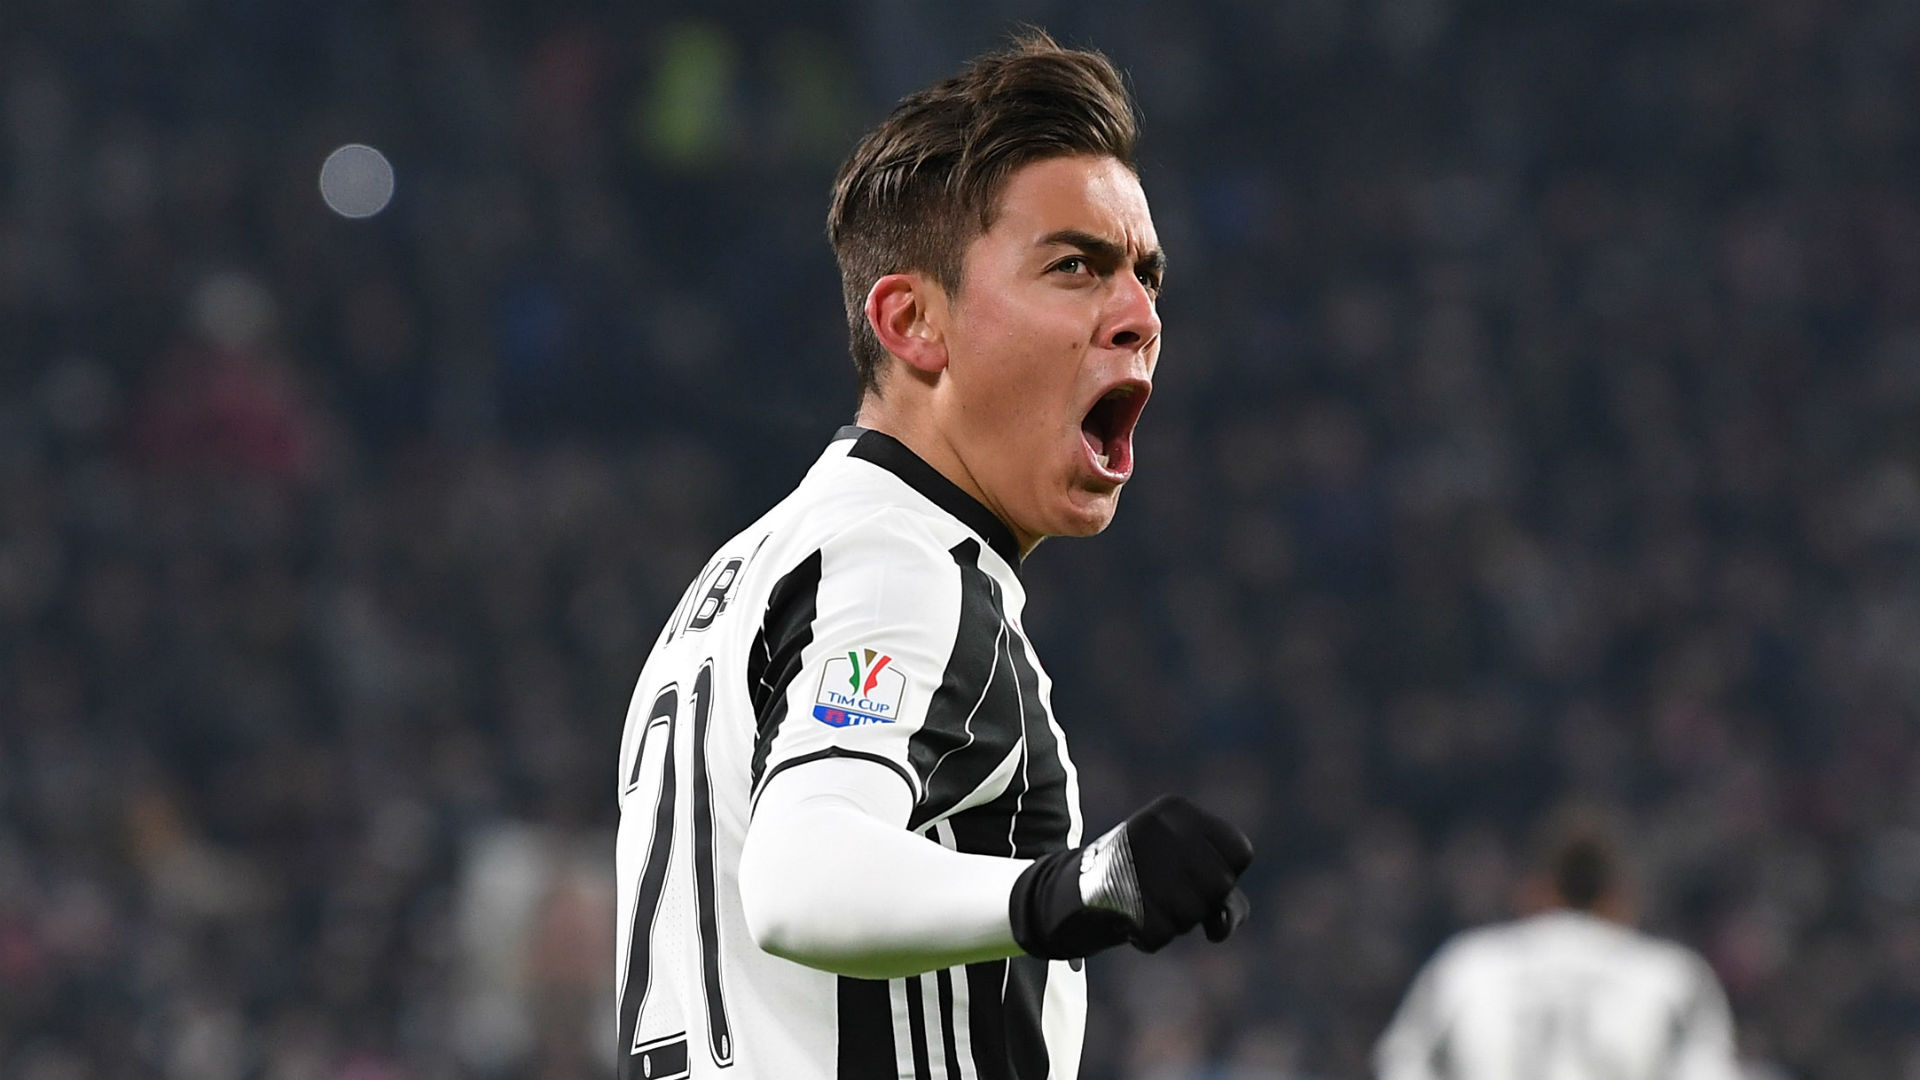 Paulo Dybala Is The New Lionel Messi And Is Worth €150m Believes Palermo President Maurizio Zamparini